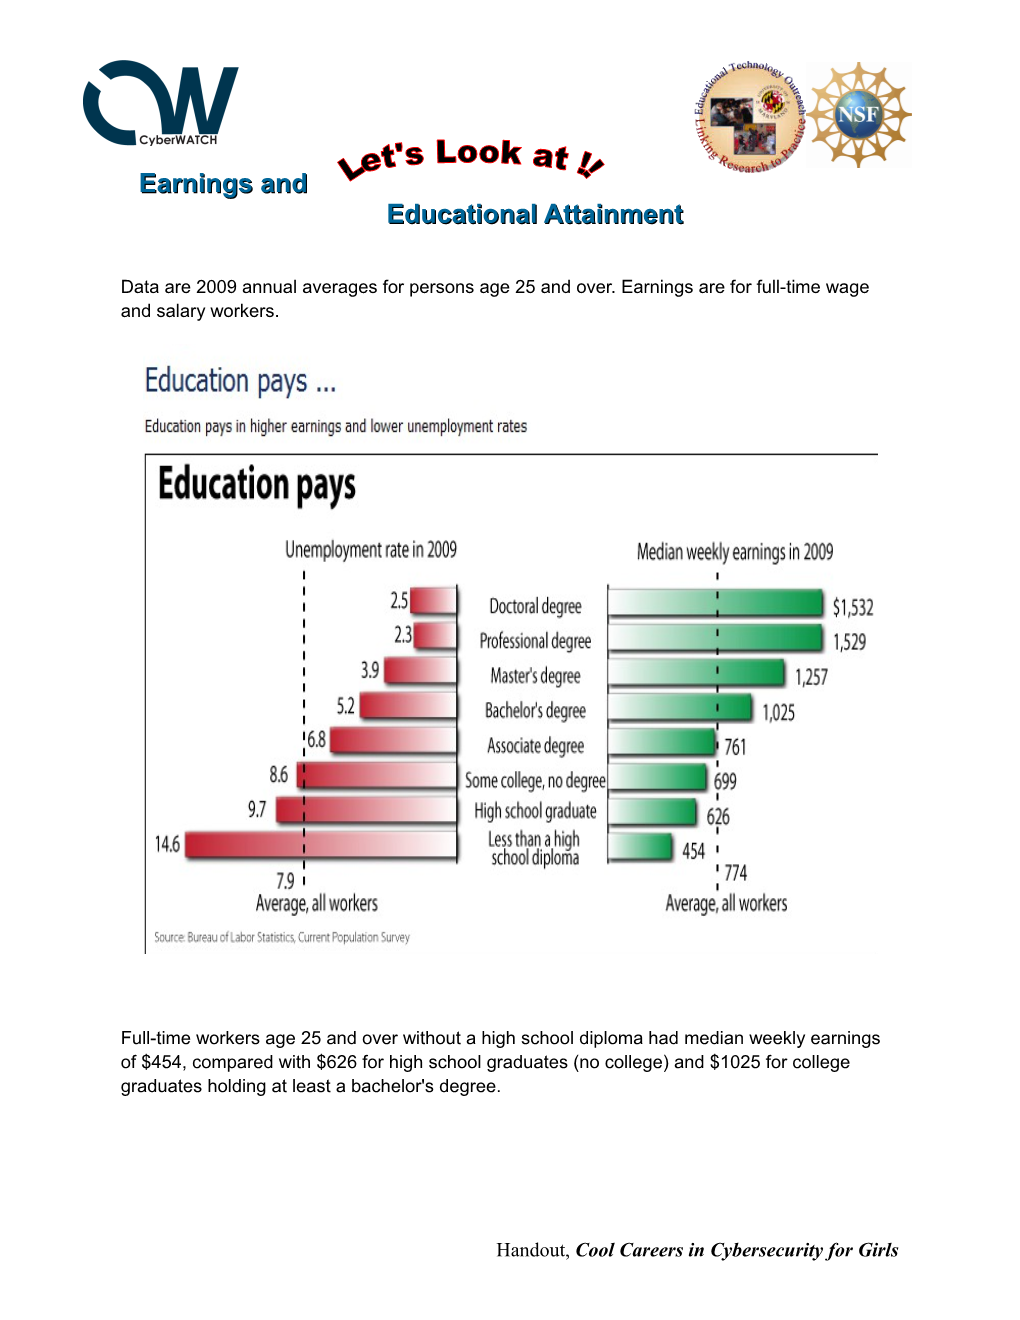 Earnings and Educational Attainment